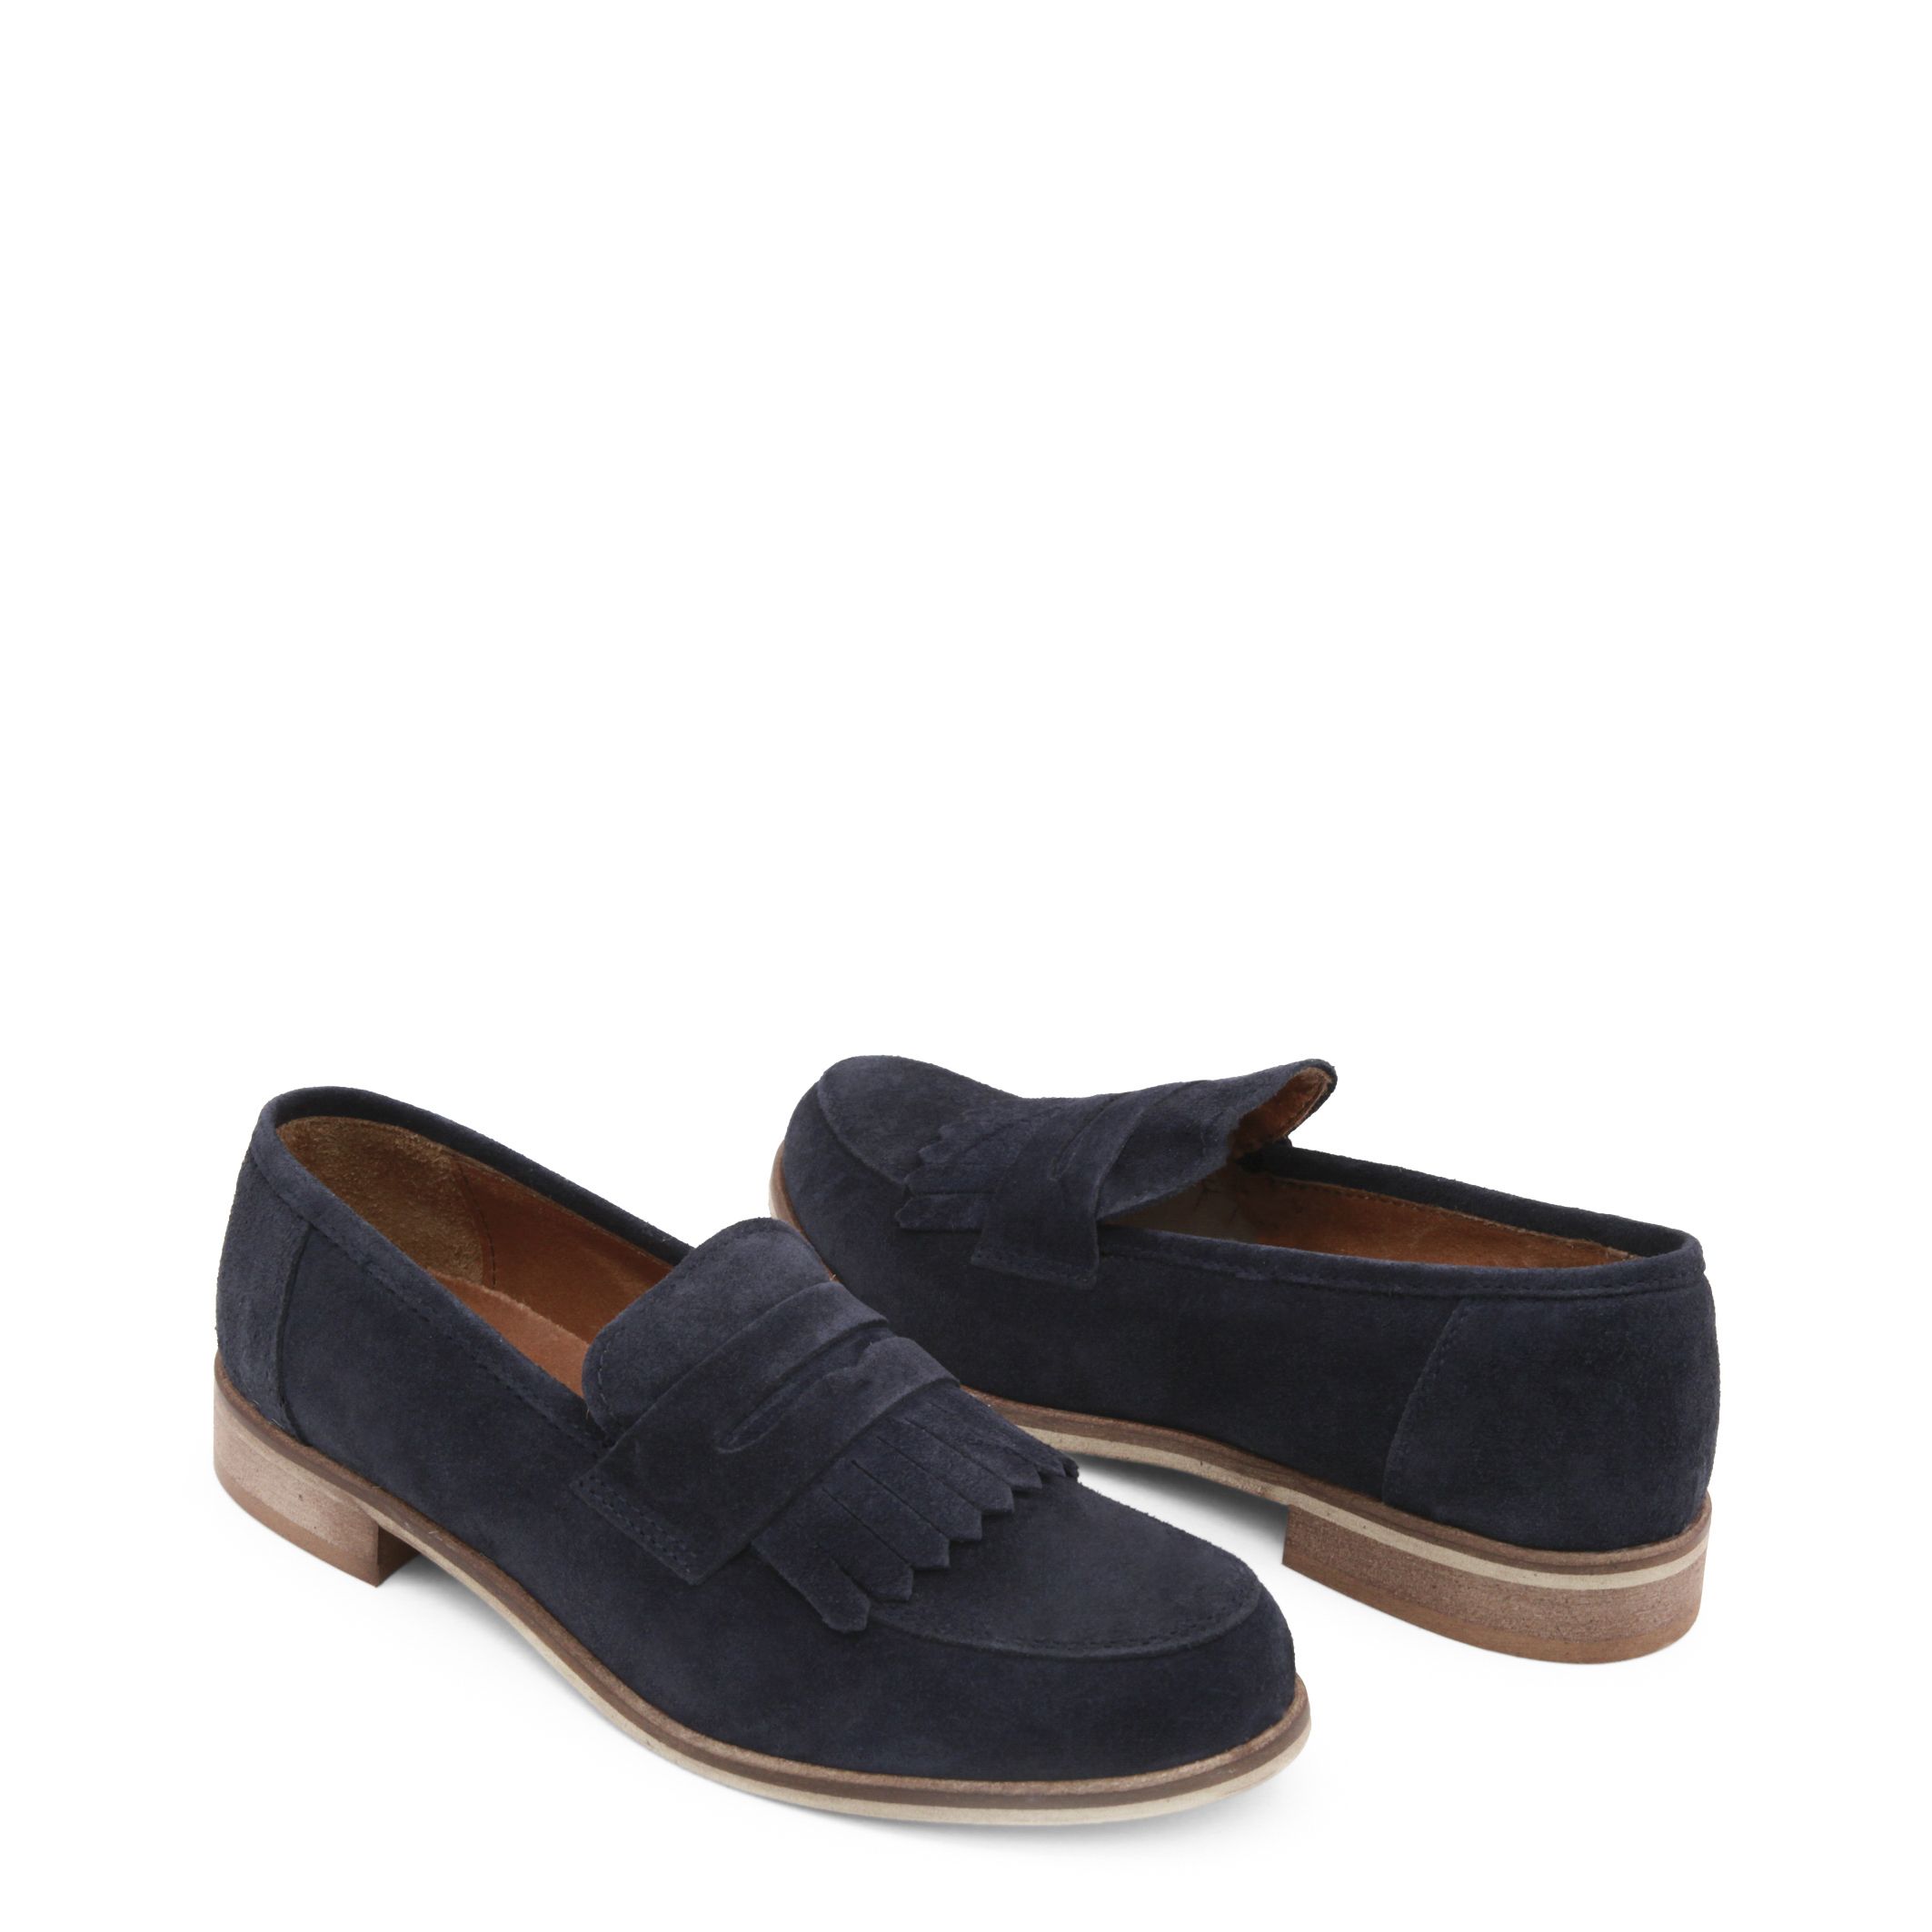 Made in: Italy <br> Collection: Spring/Summer <br> Gender: Woman <br> Type: Loafers <br> Upper: suede <br> Insole: leather <br> Internal lining: leather <br> Sole: tunit <br> Heel height cm: 2.5 <br> Details: fringes, round toe